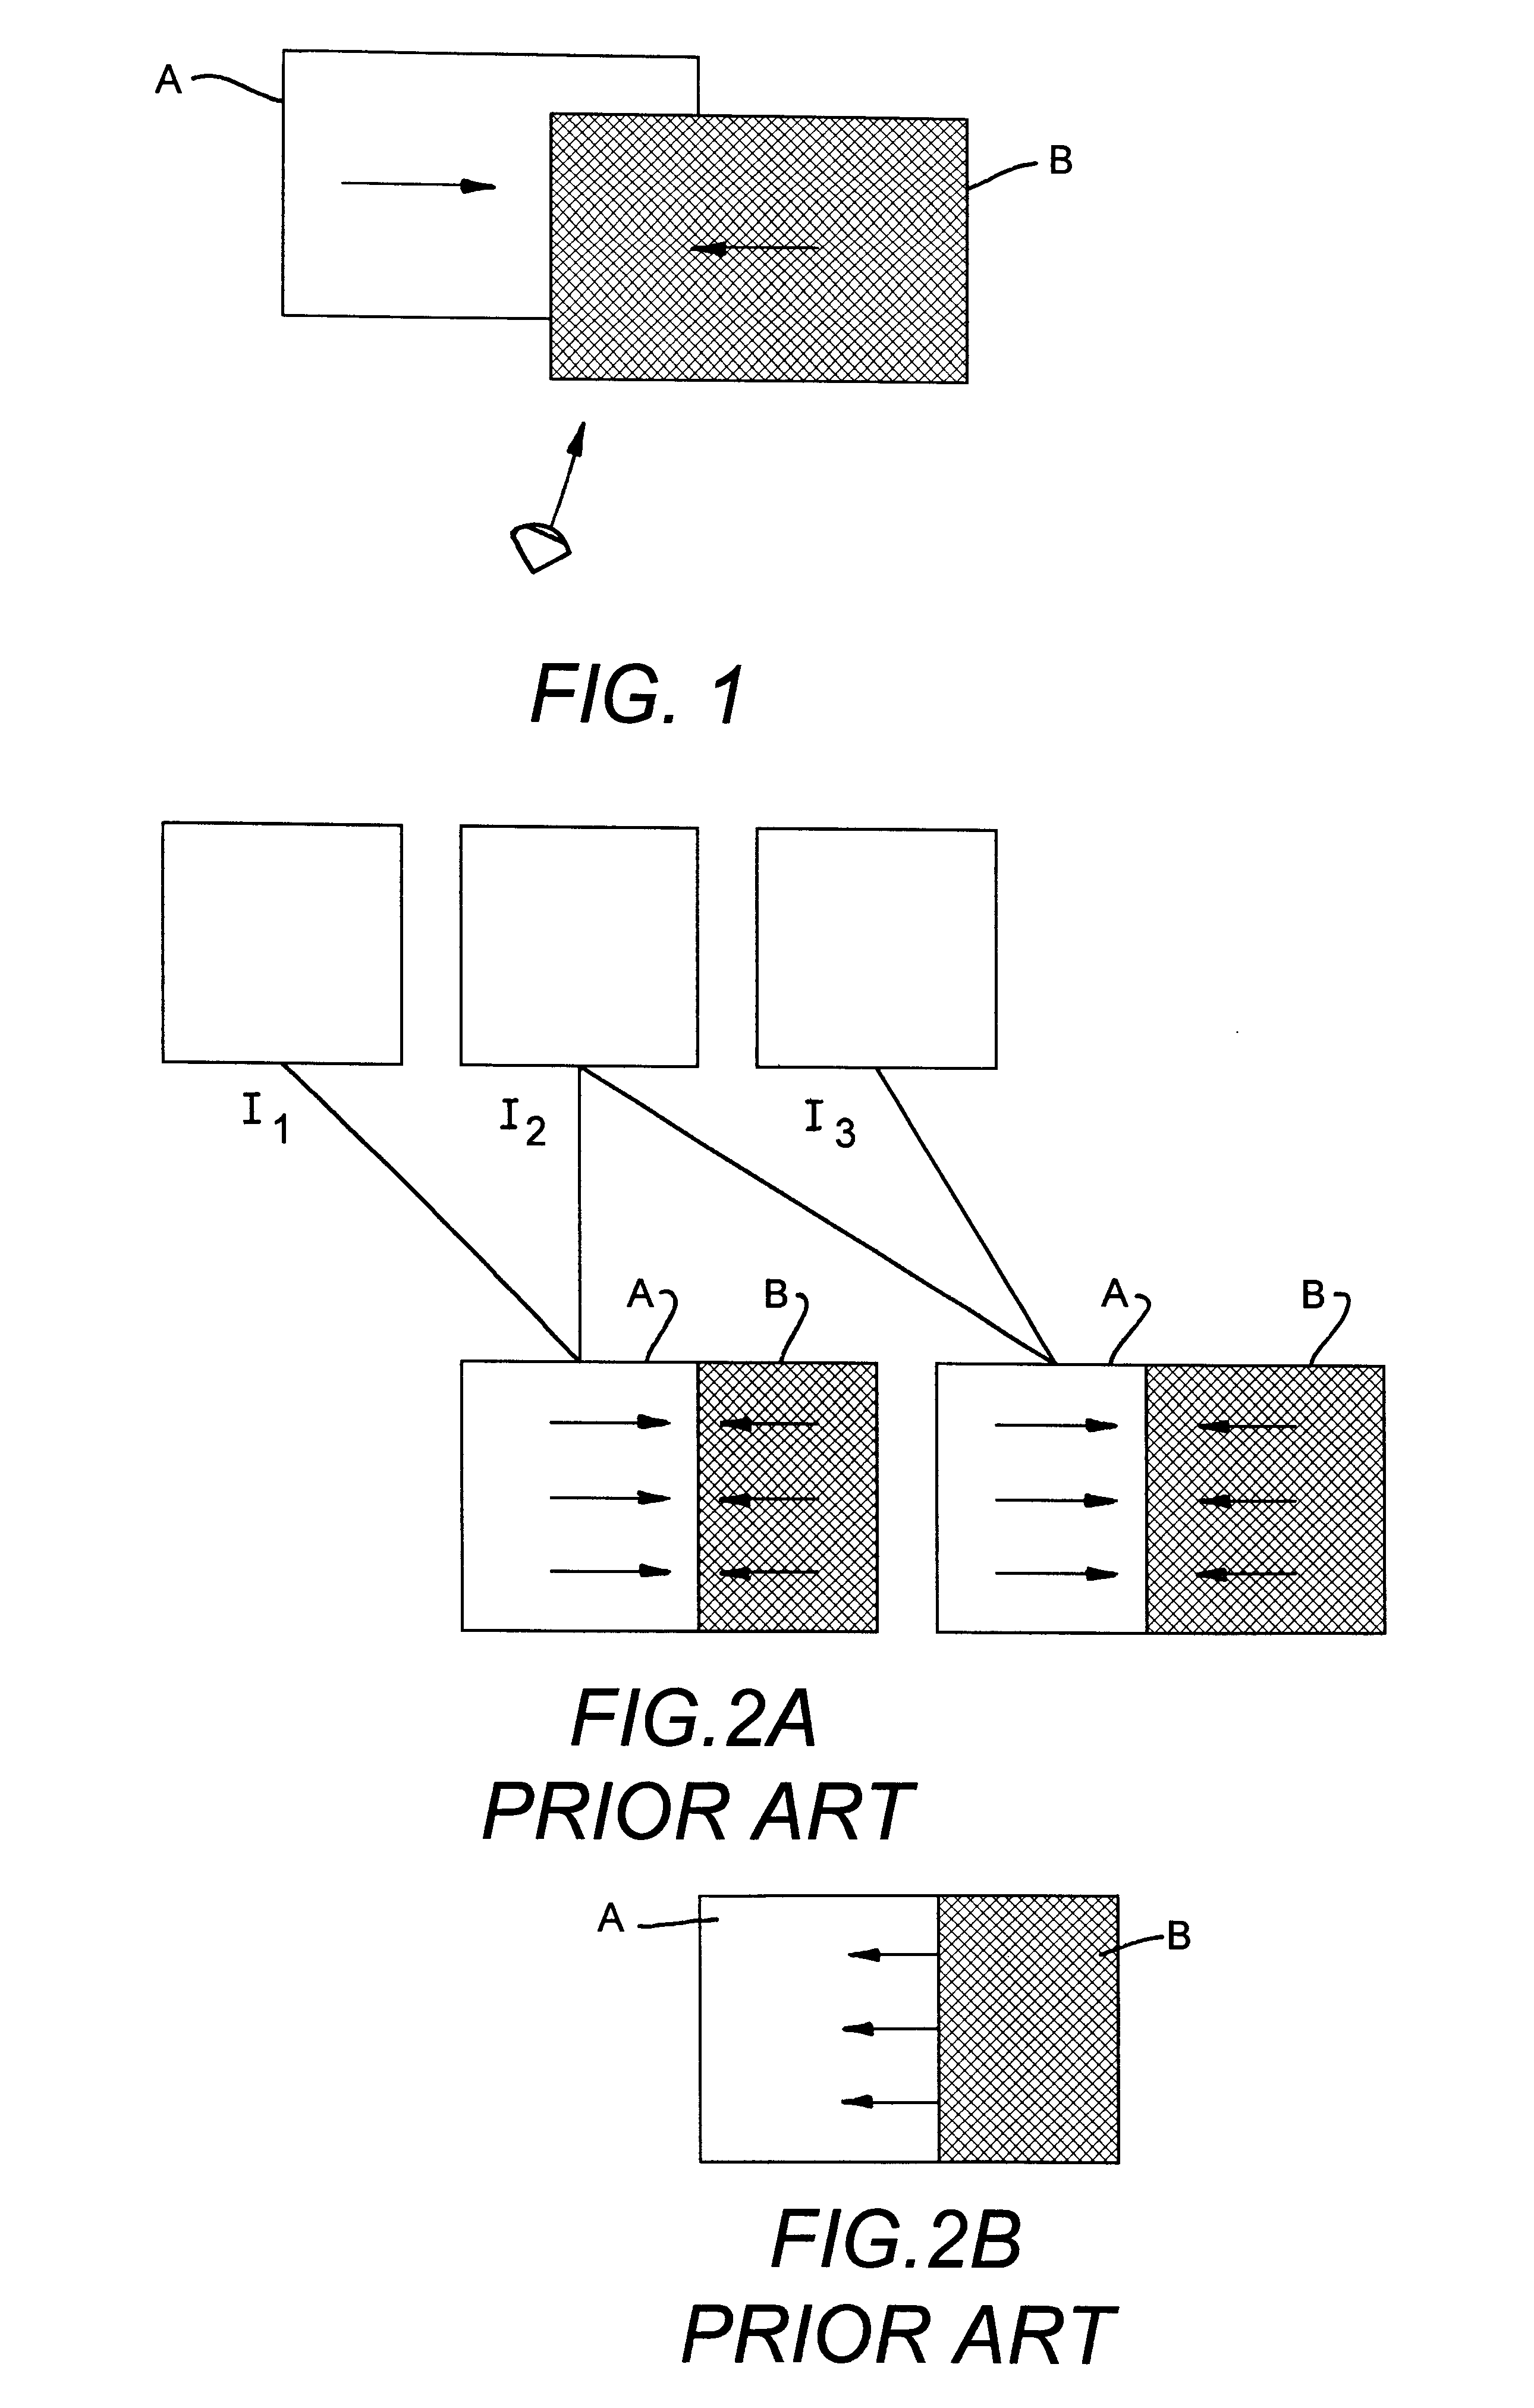 Method for the detection of the relative depth of objects in an image from a pair of images